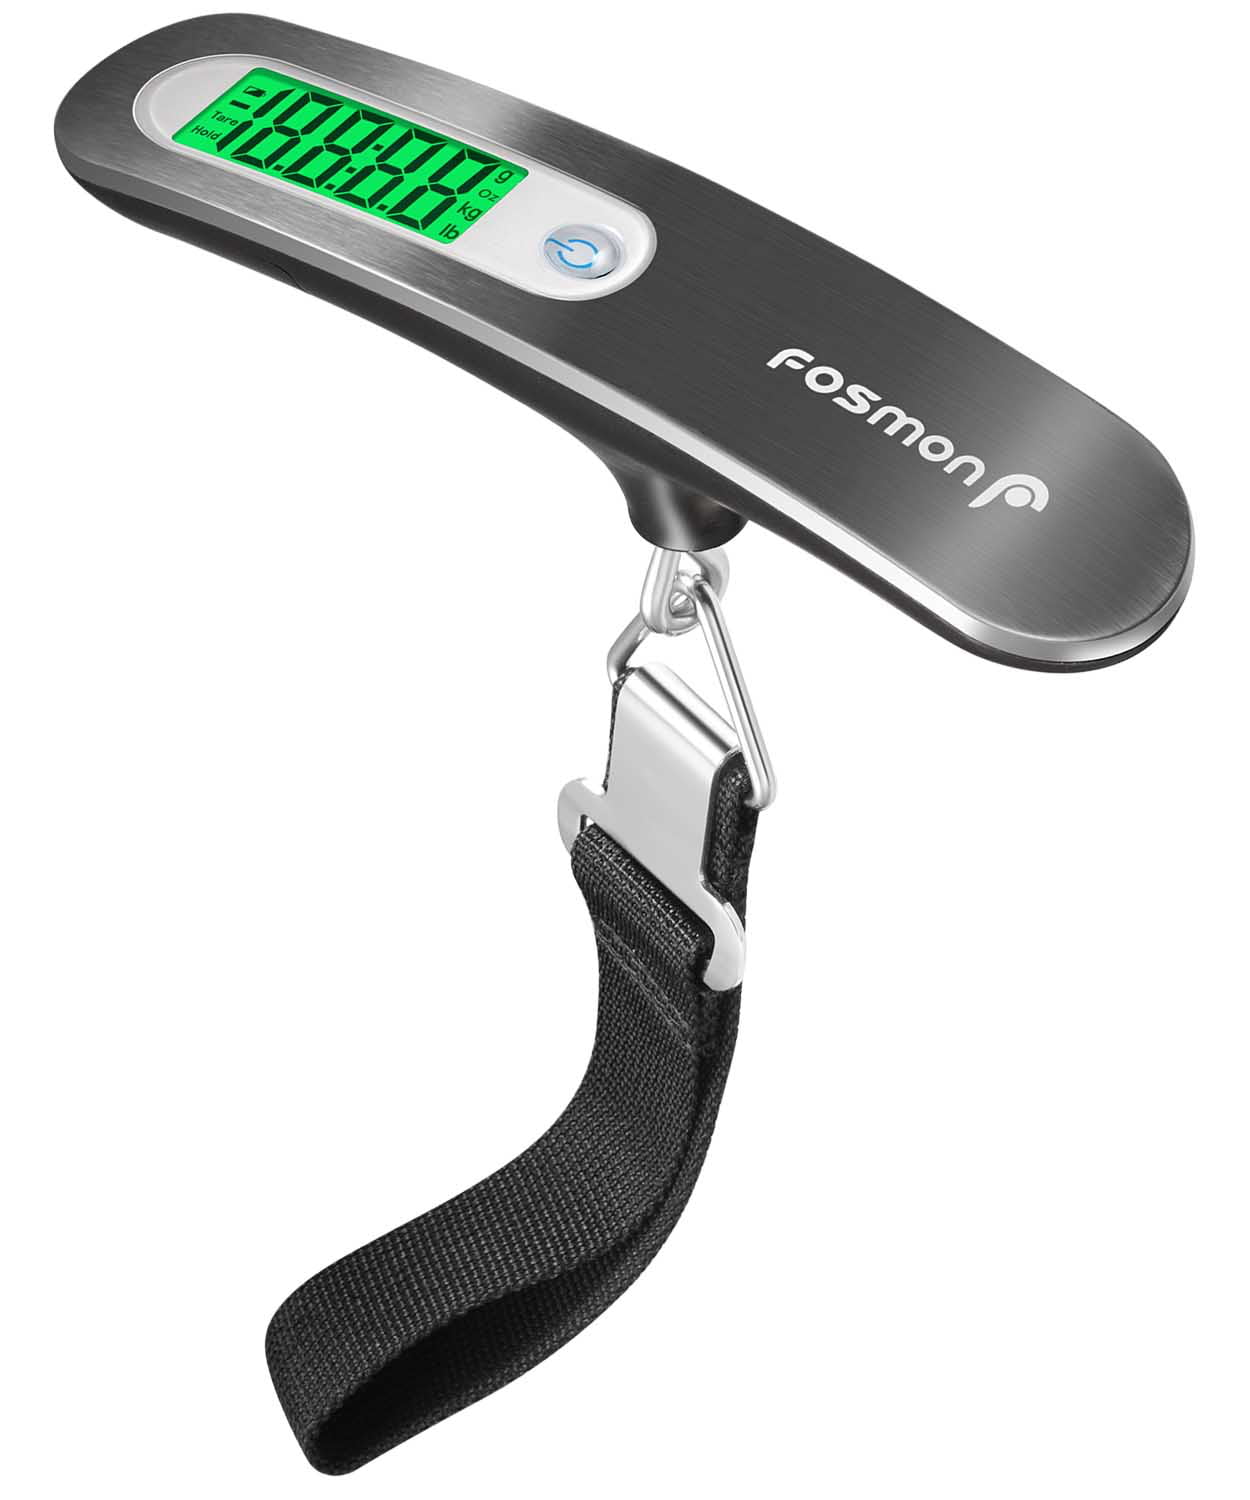 Rechargeable Hanging Luggage Scale 2600mAH Portable Power Bank & Rubber Paint,110lbs Baggage Scale with Backlit LCD Display,Portable Travel Luggage Weight Scale with Straps for Travelers,Gary 